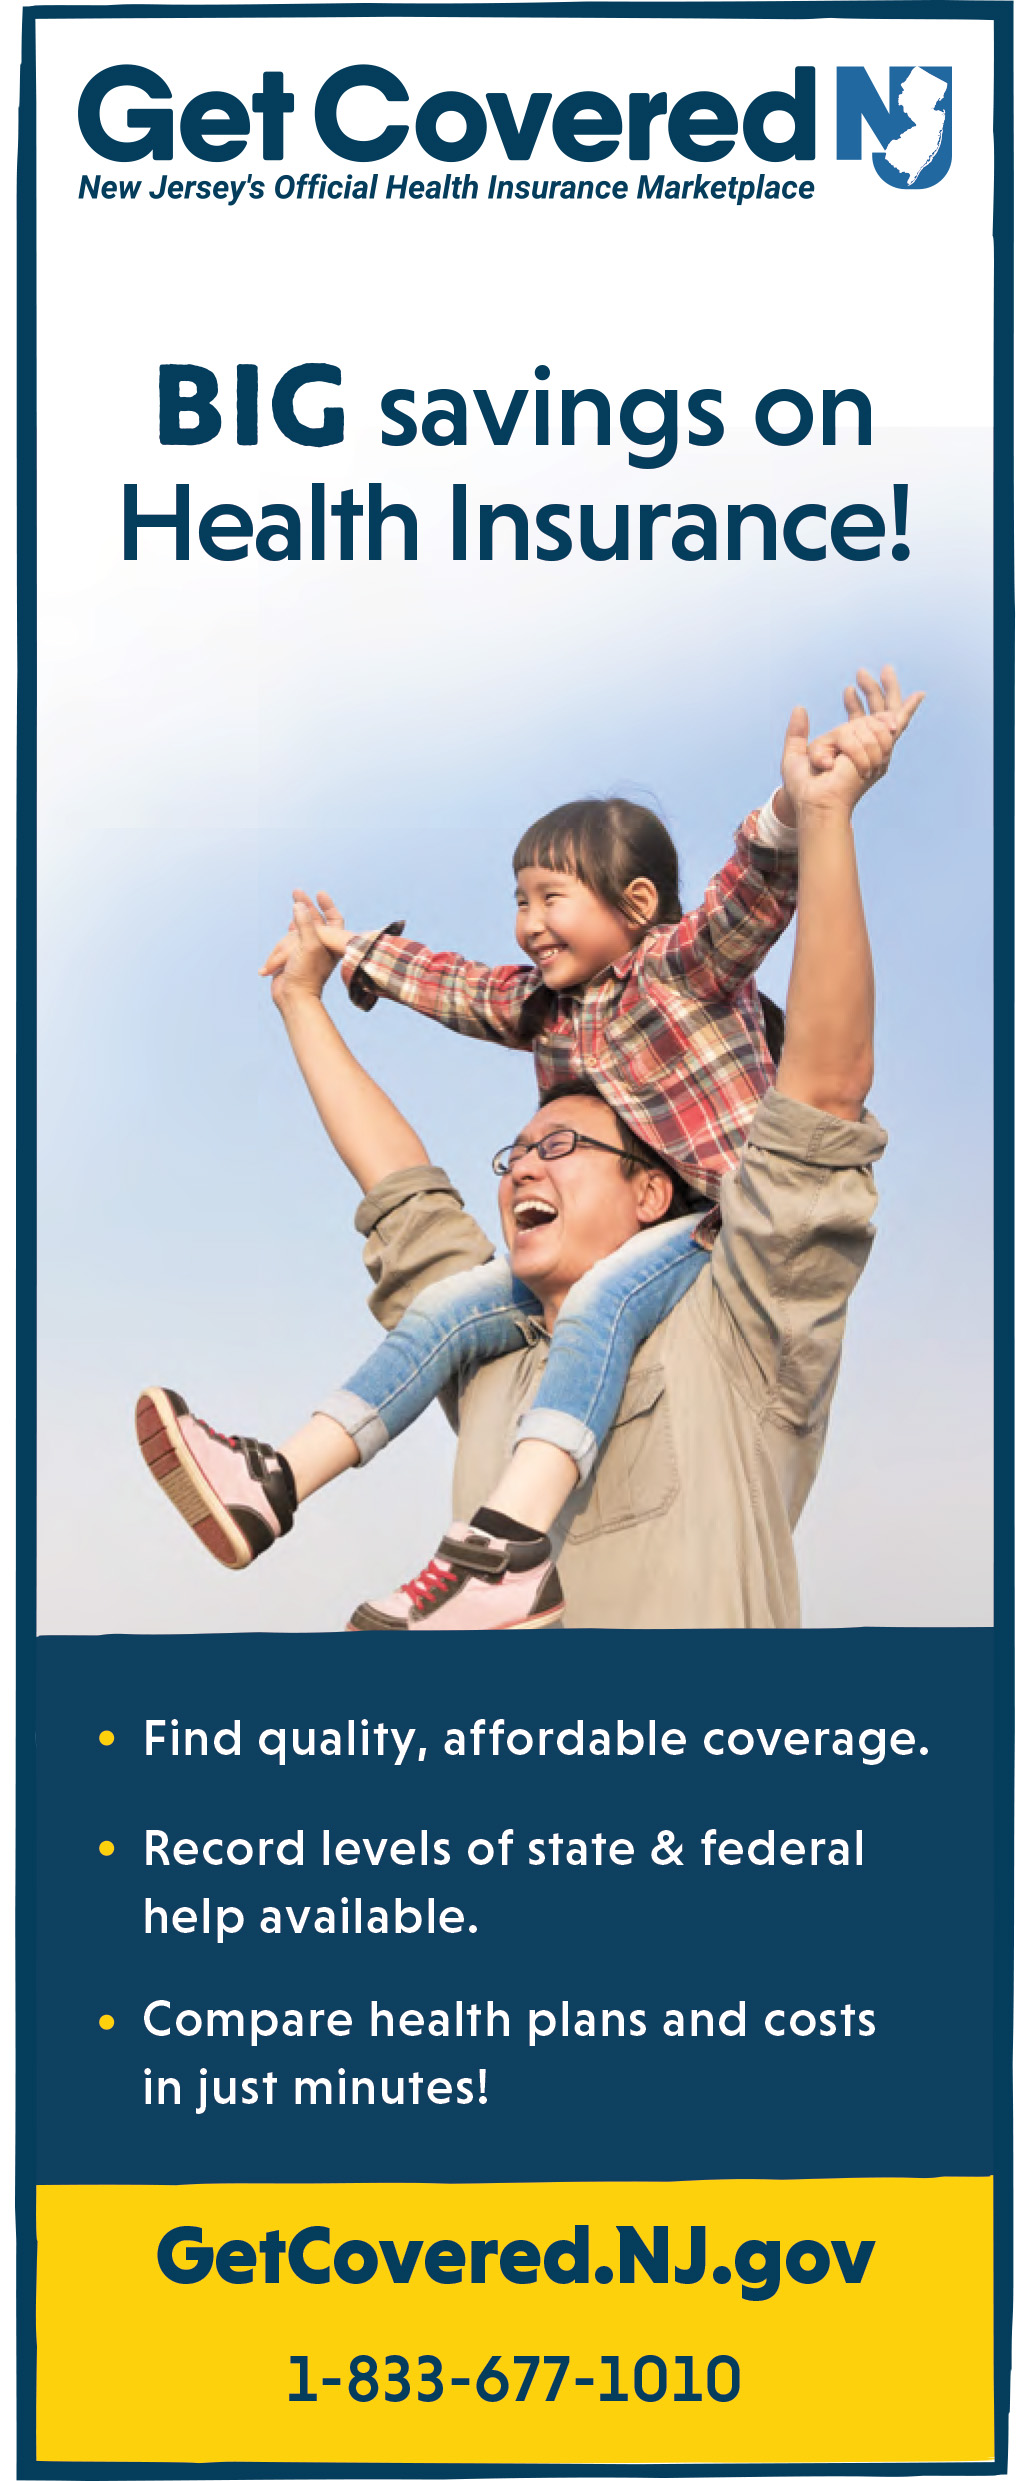 Get Covered NJ